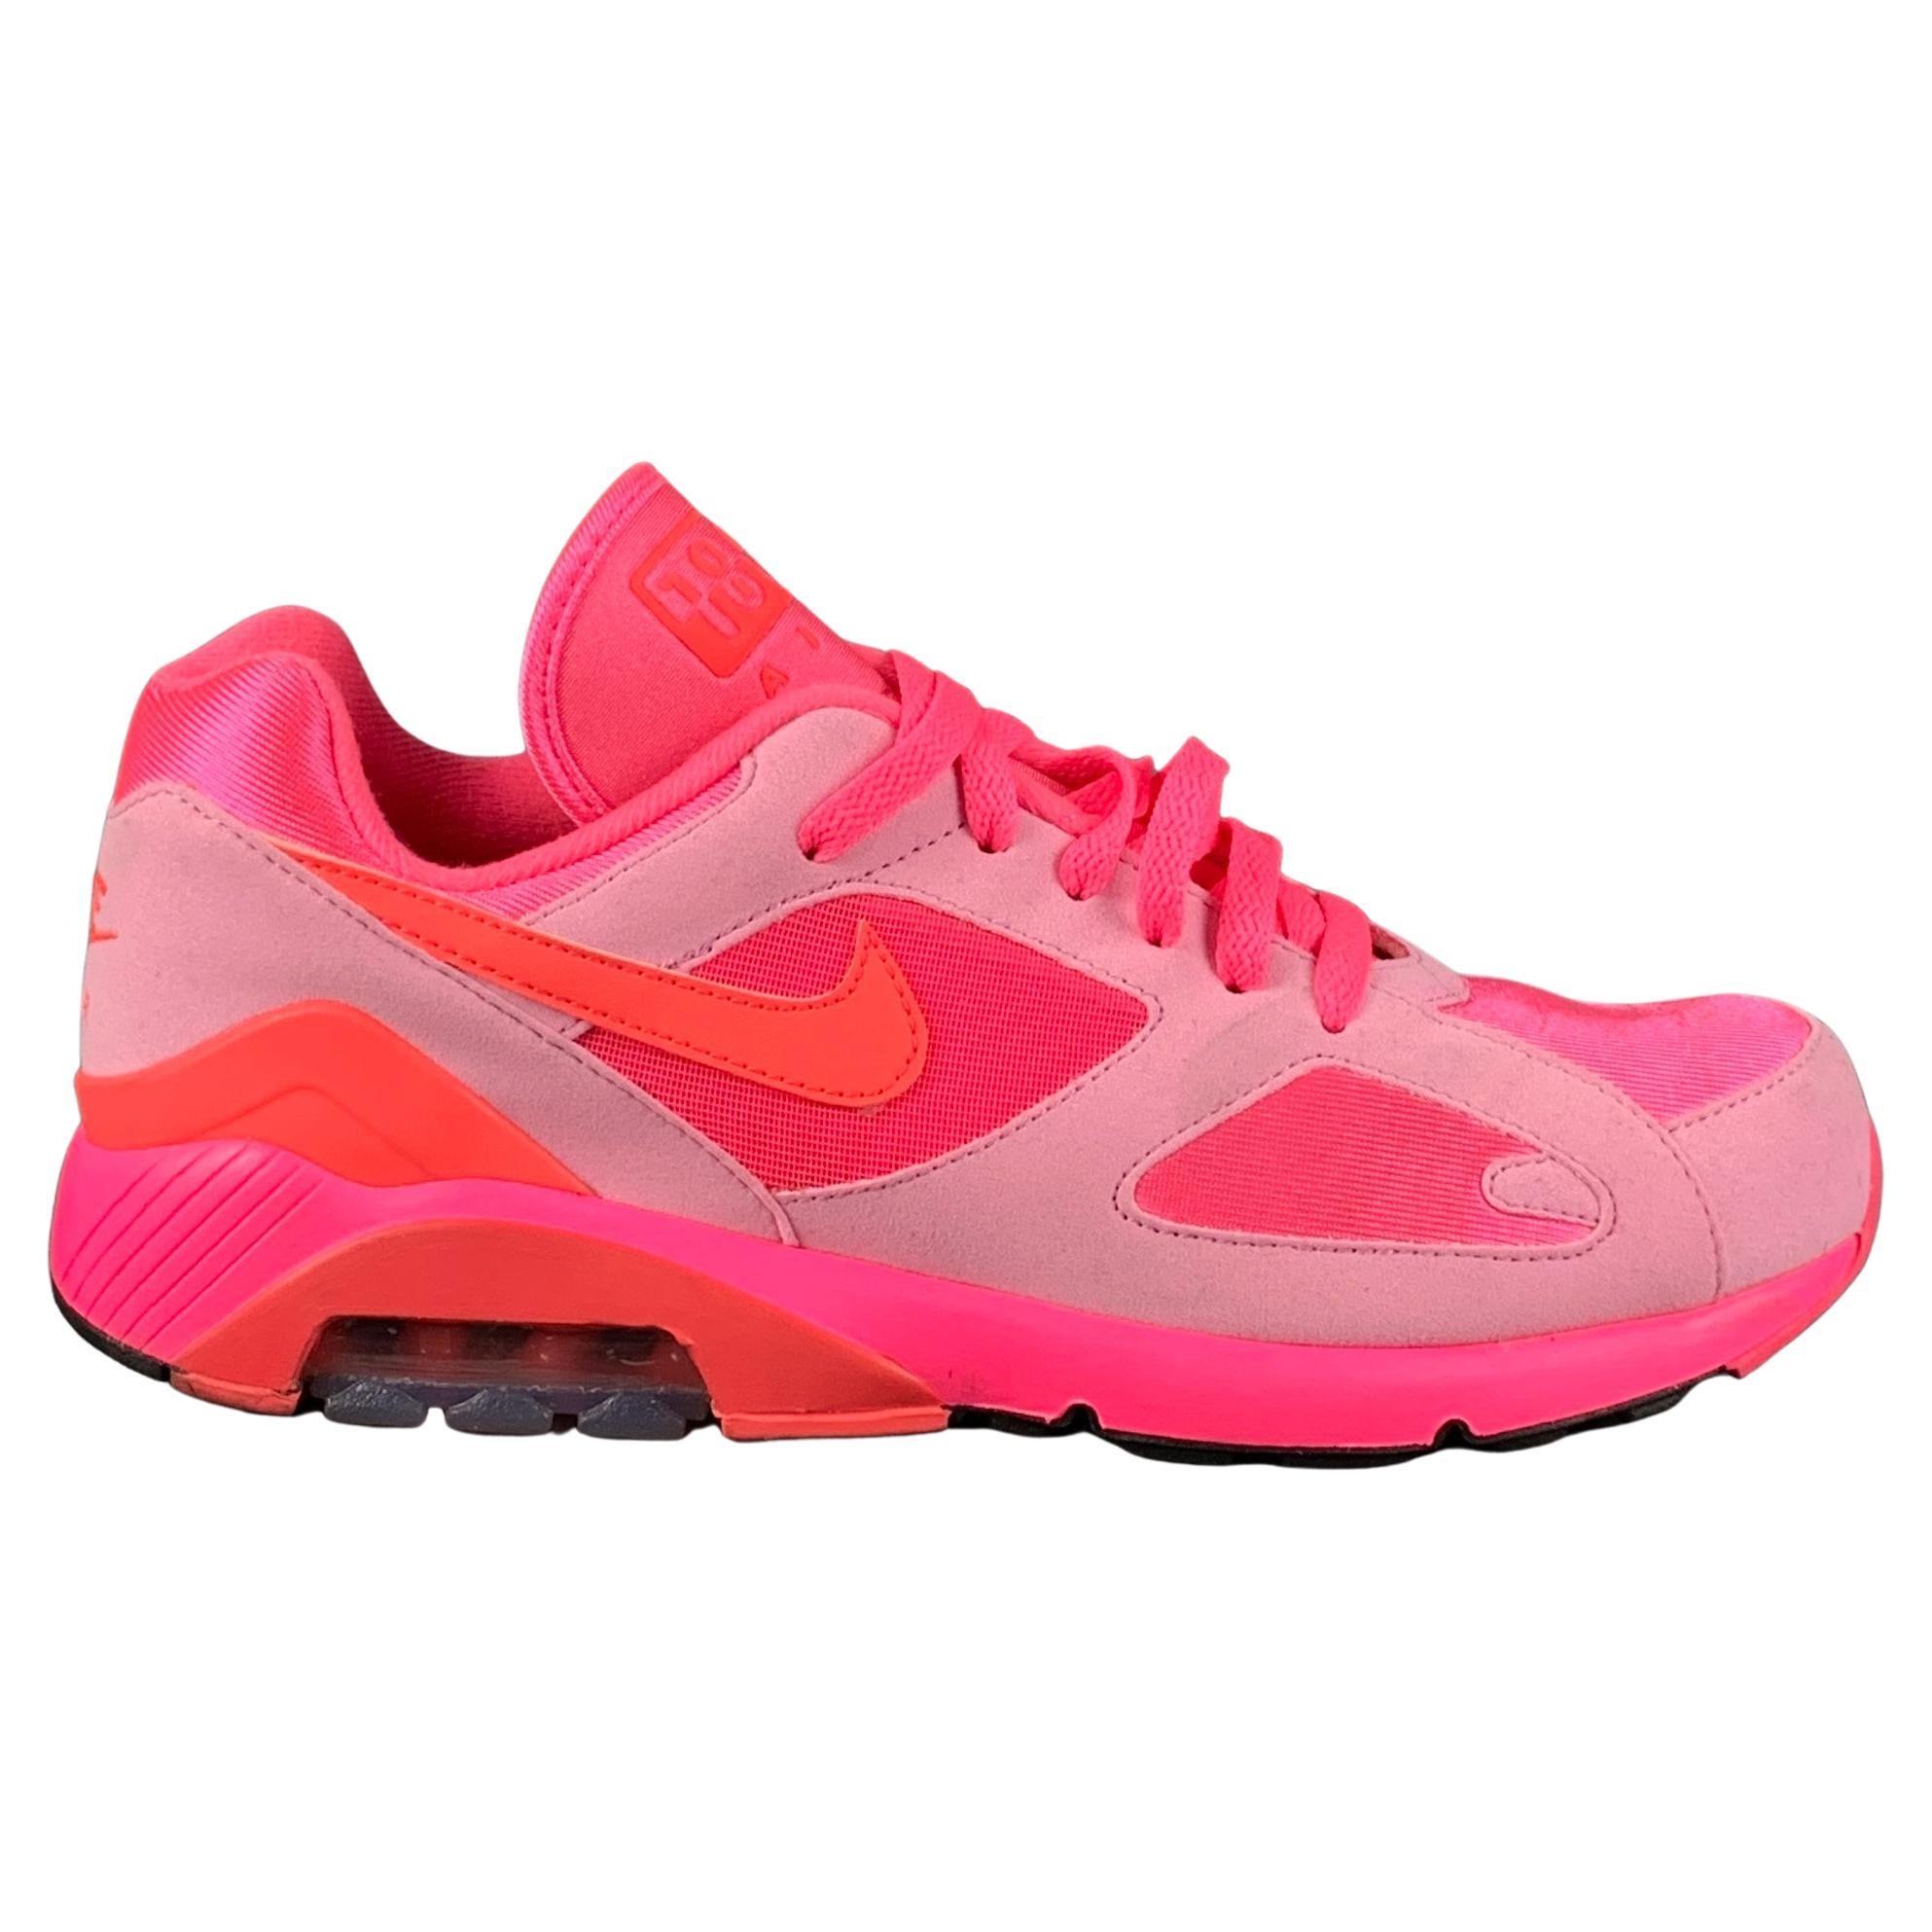 NIKE x COMME des GARCONS Air 180 Size 9.5 Pink Neon Mixed Materials Sneakers For Sale at 1stDibs